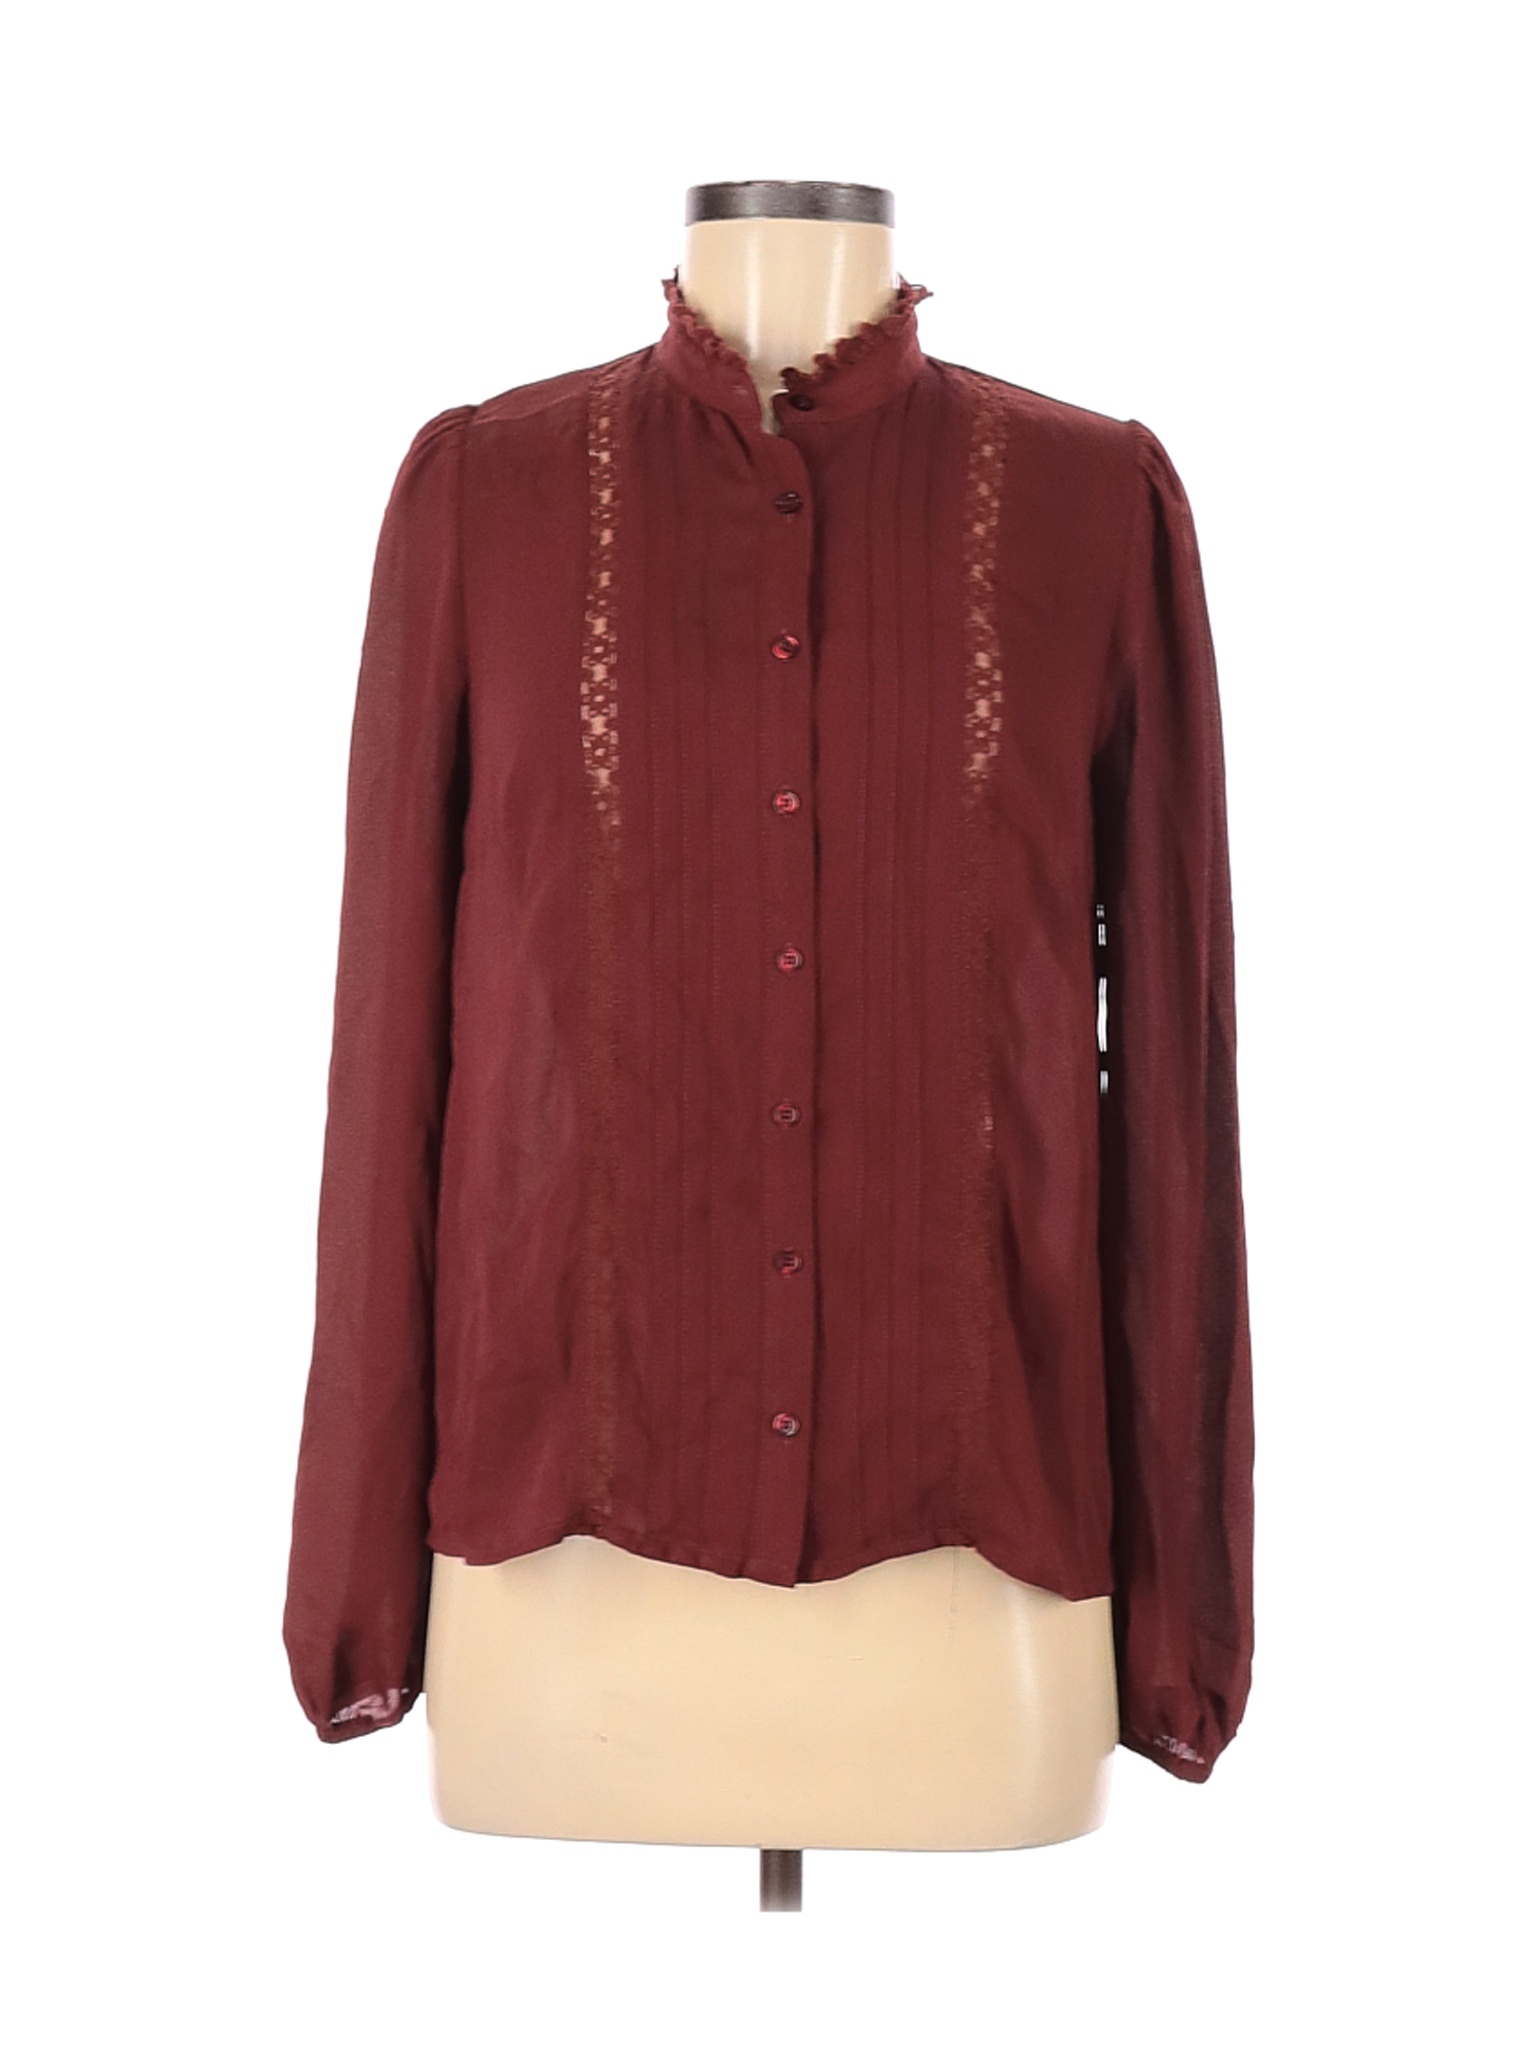 forever21 contemporary red button shirt